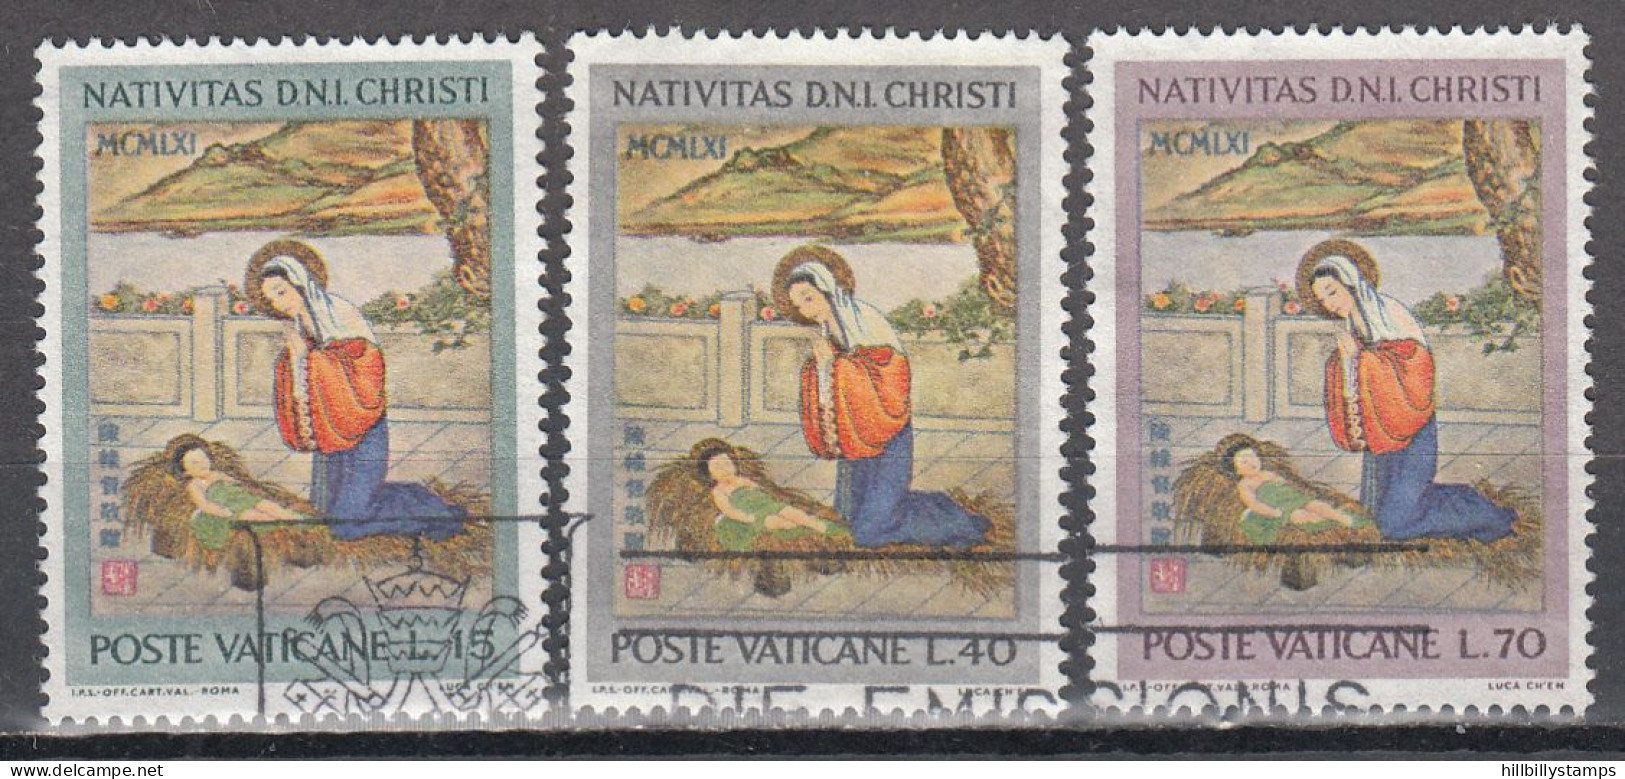 VATICAN   SCOTT NO 323-25    USED   YEAR  1961 - Used Stamps